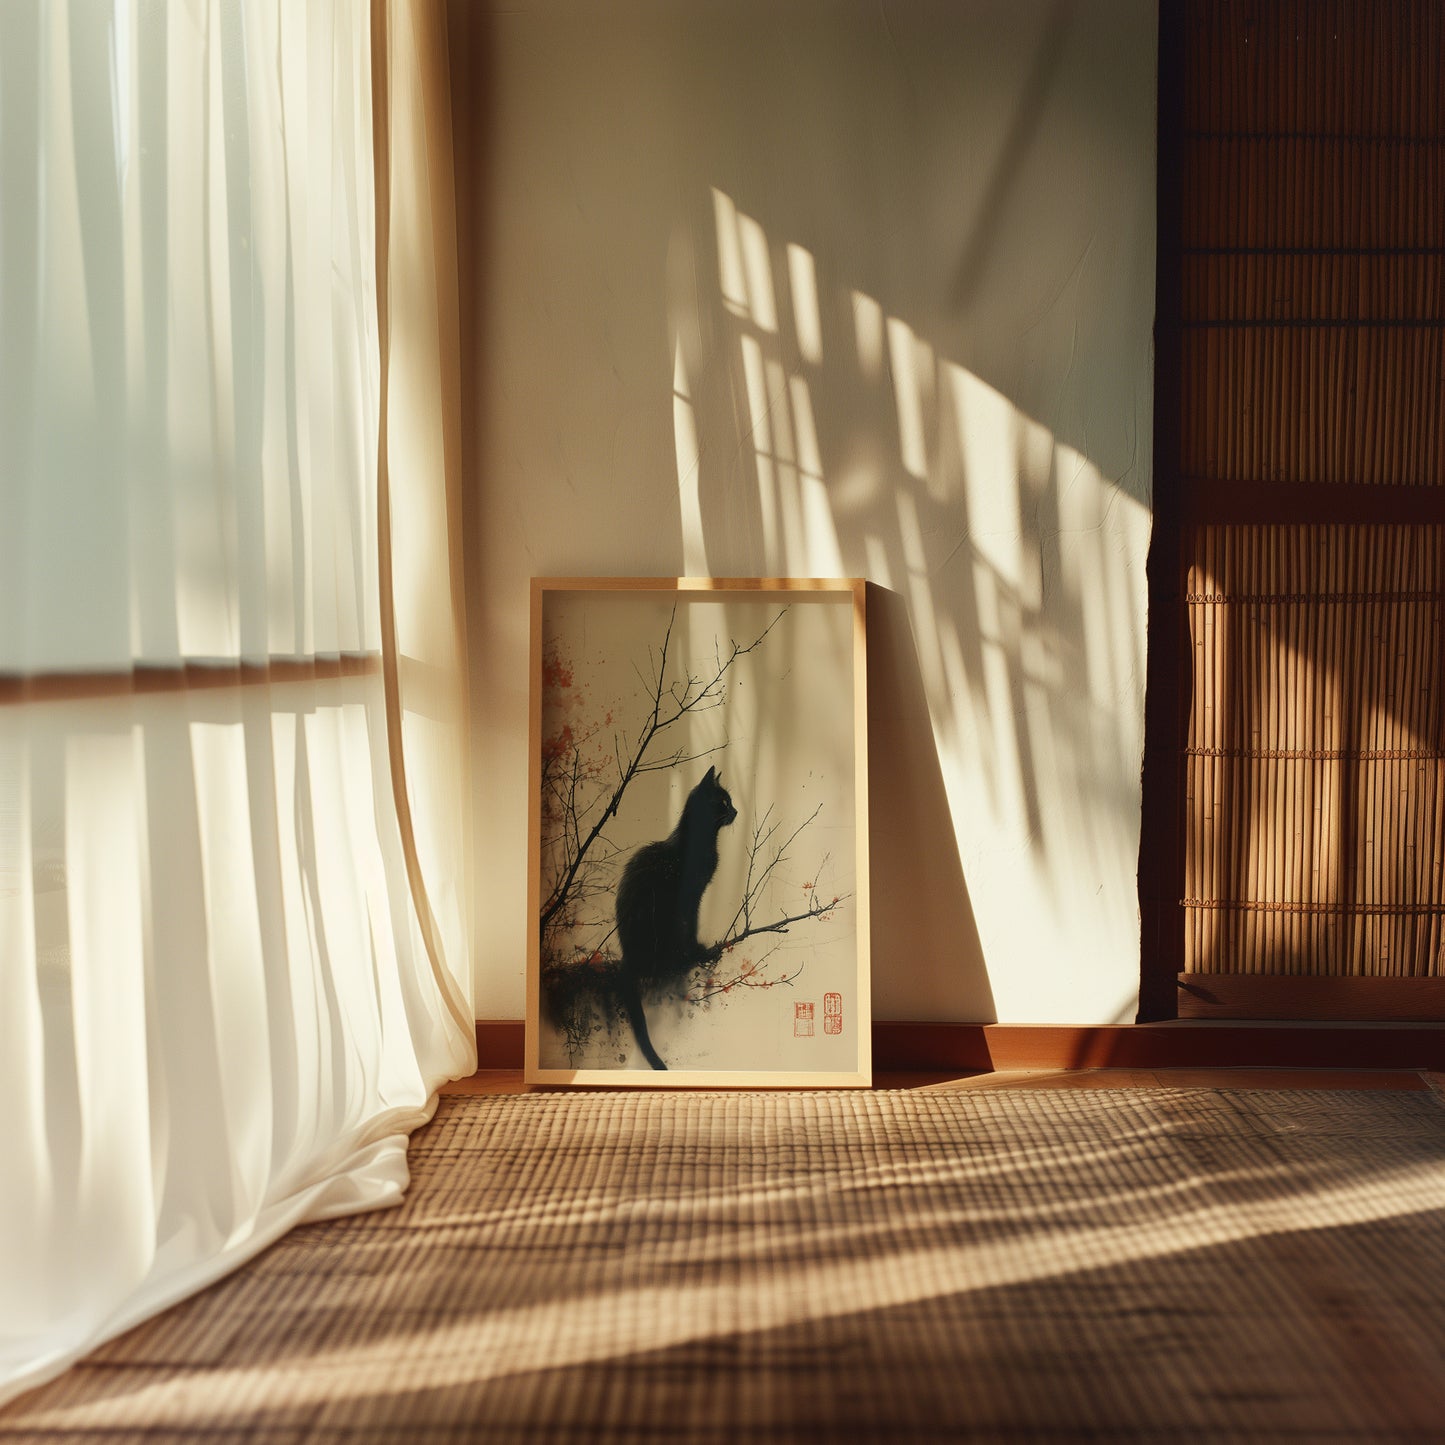 A serene room with tatami flooring, sheer curtains, a painting of a bird, and shadows from a window.